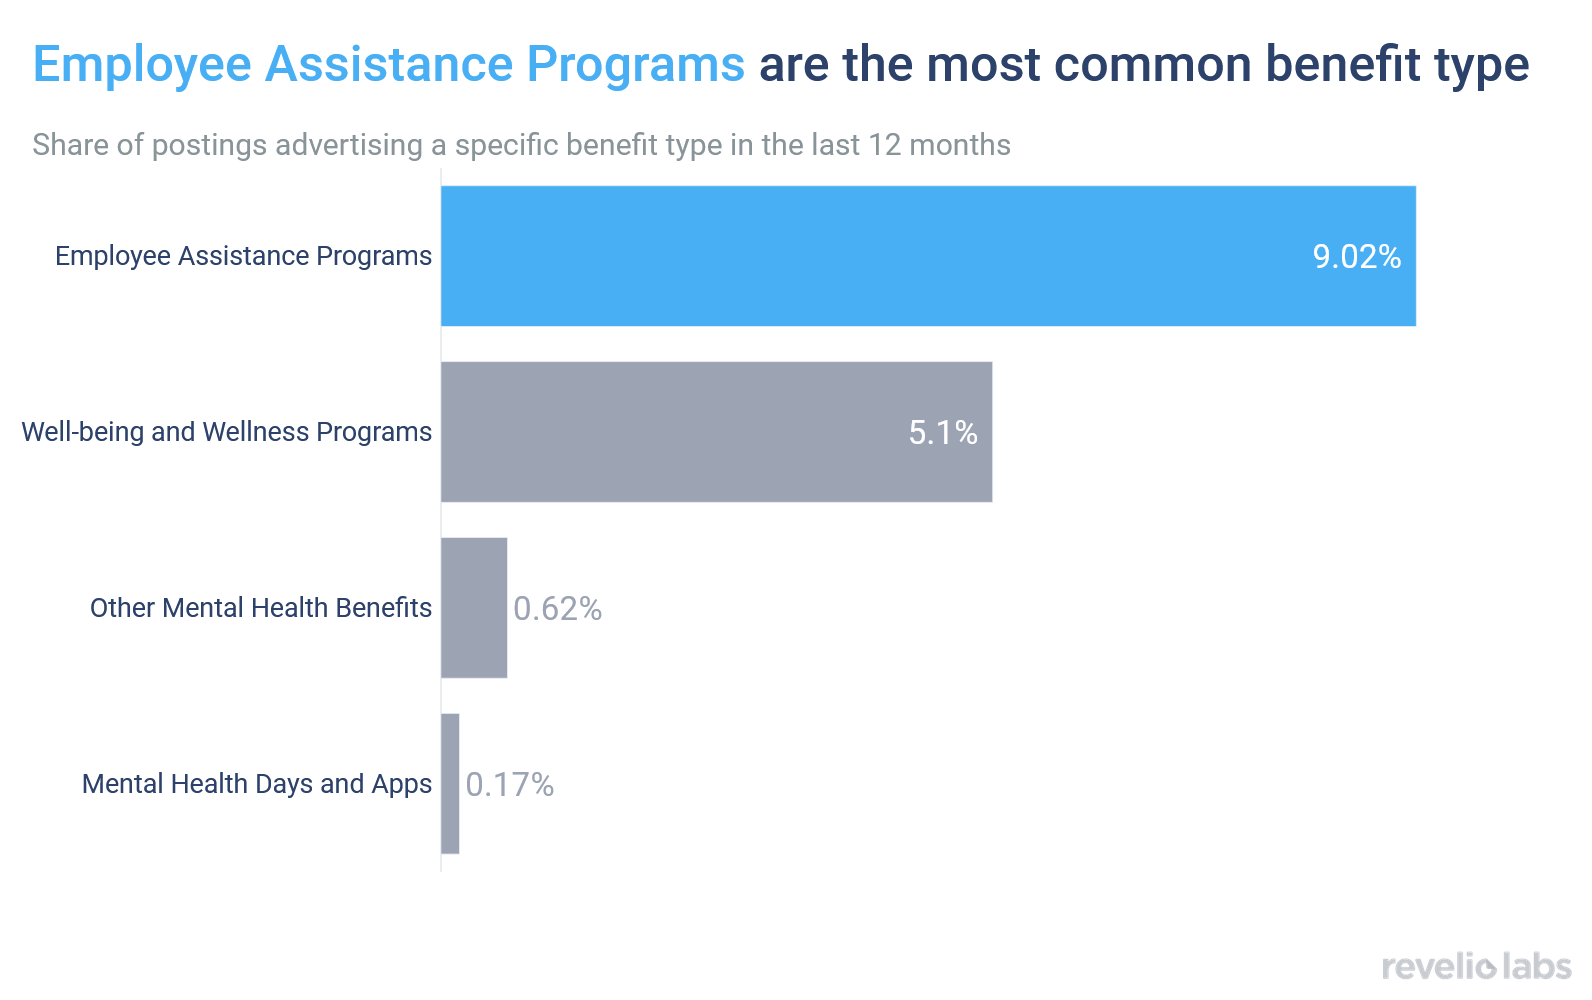 Employee Assistance Programs are the most common benefit type